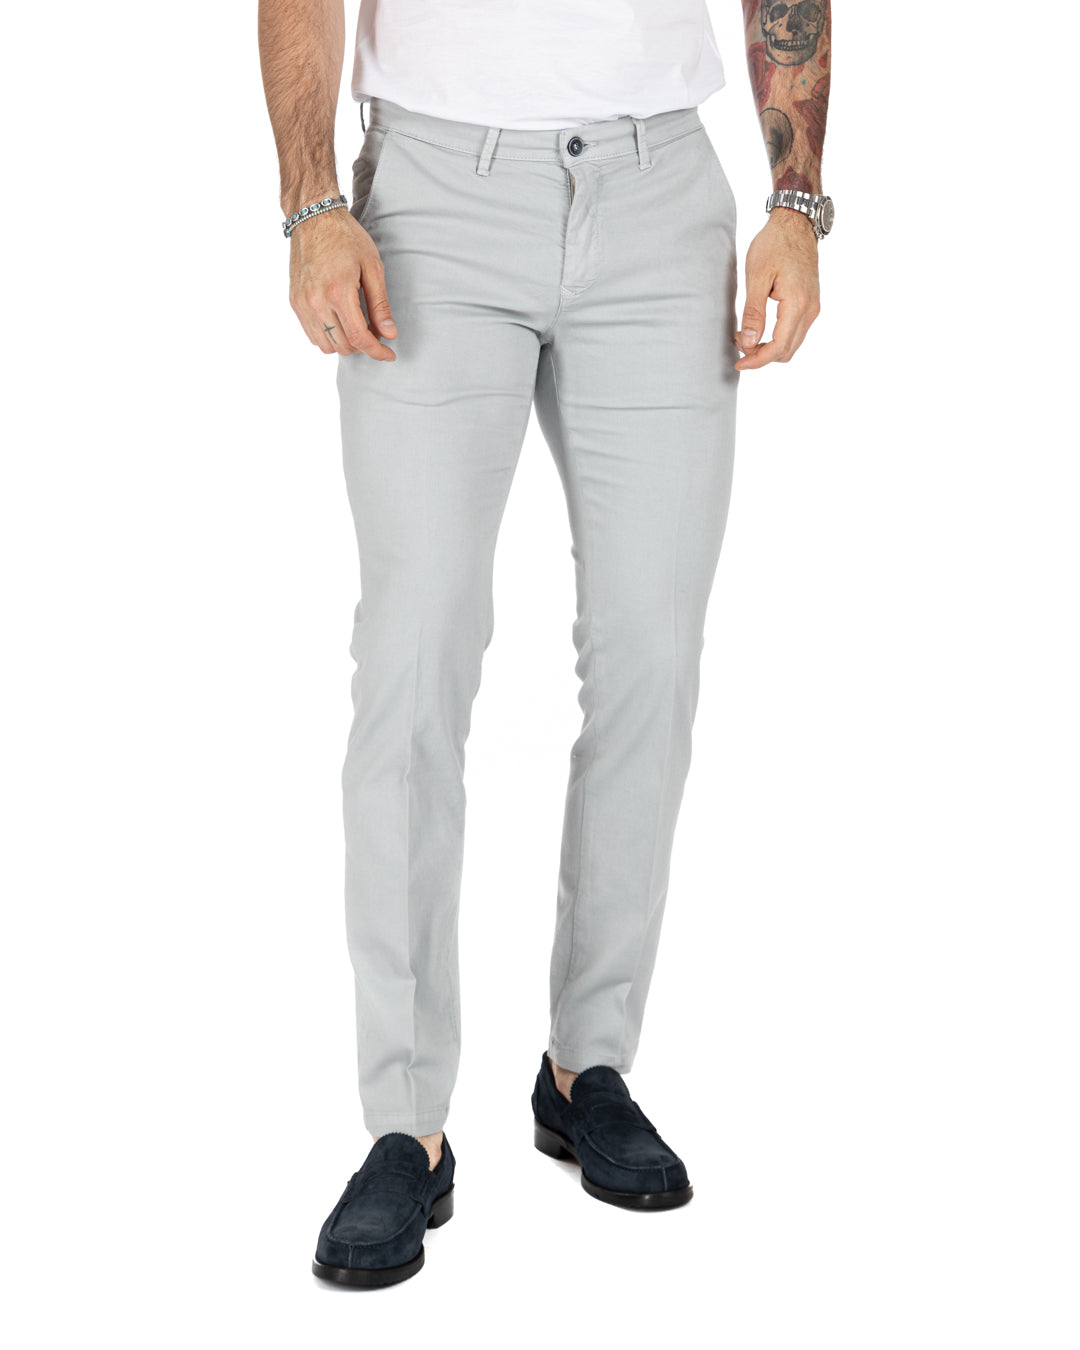 Bill - gray armored trousers